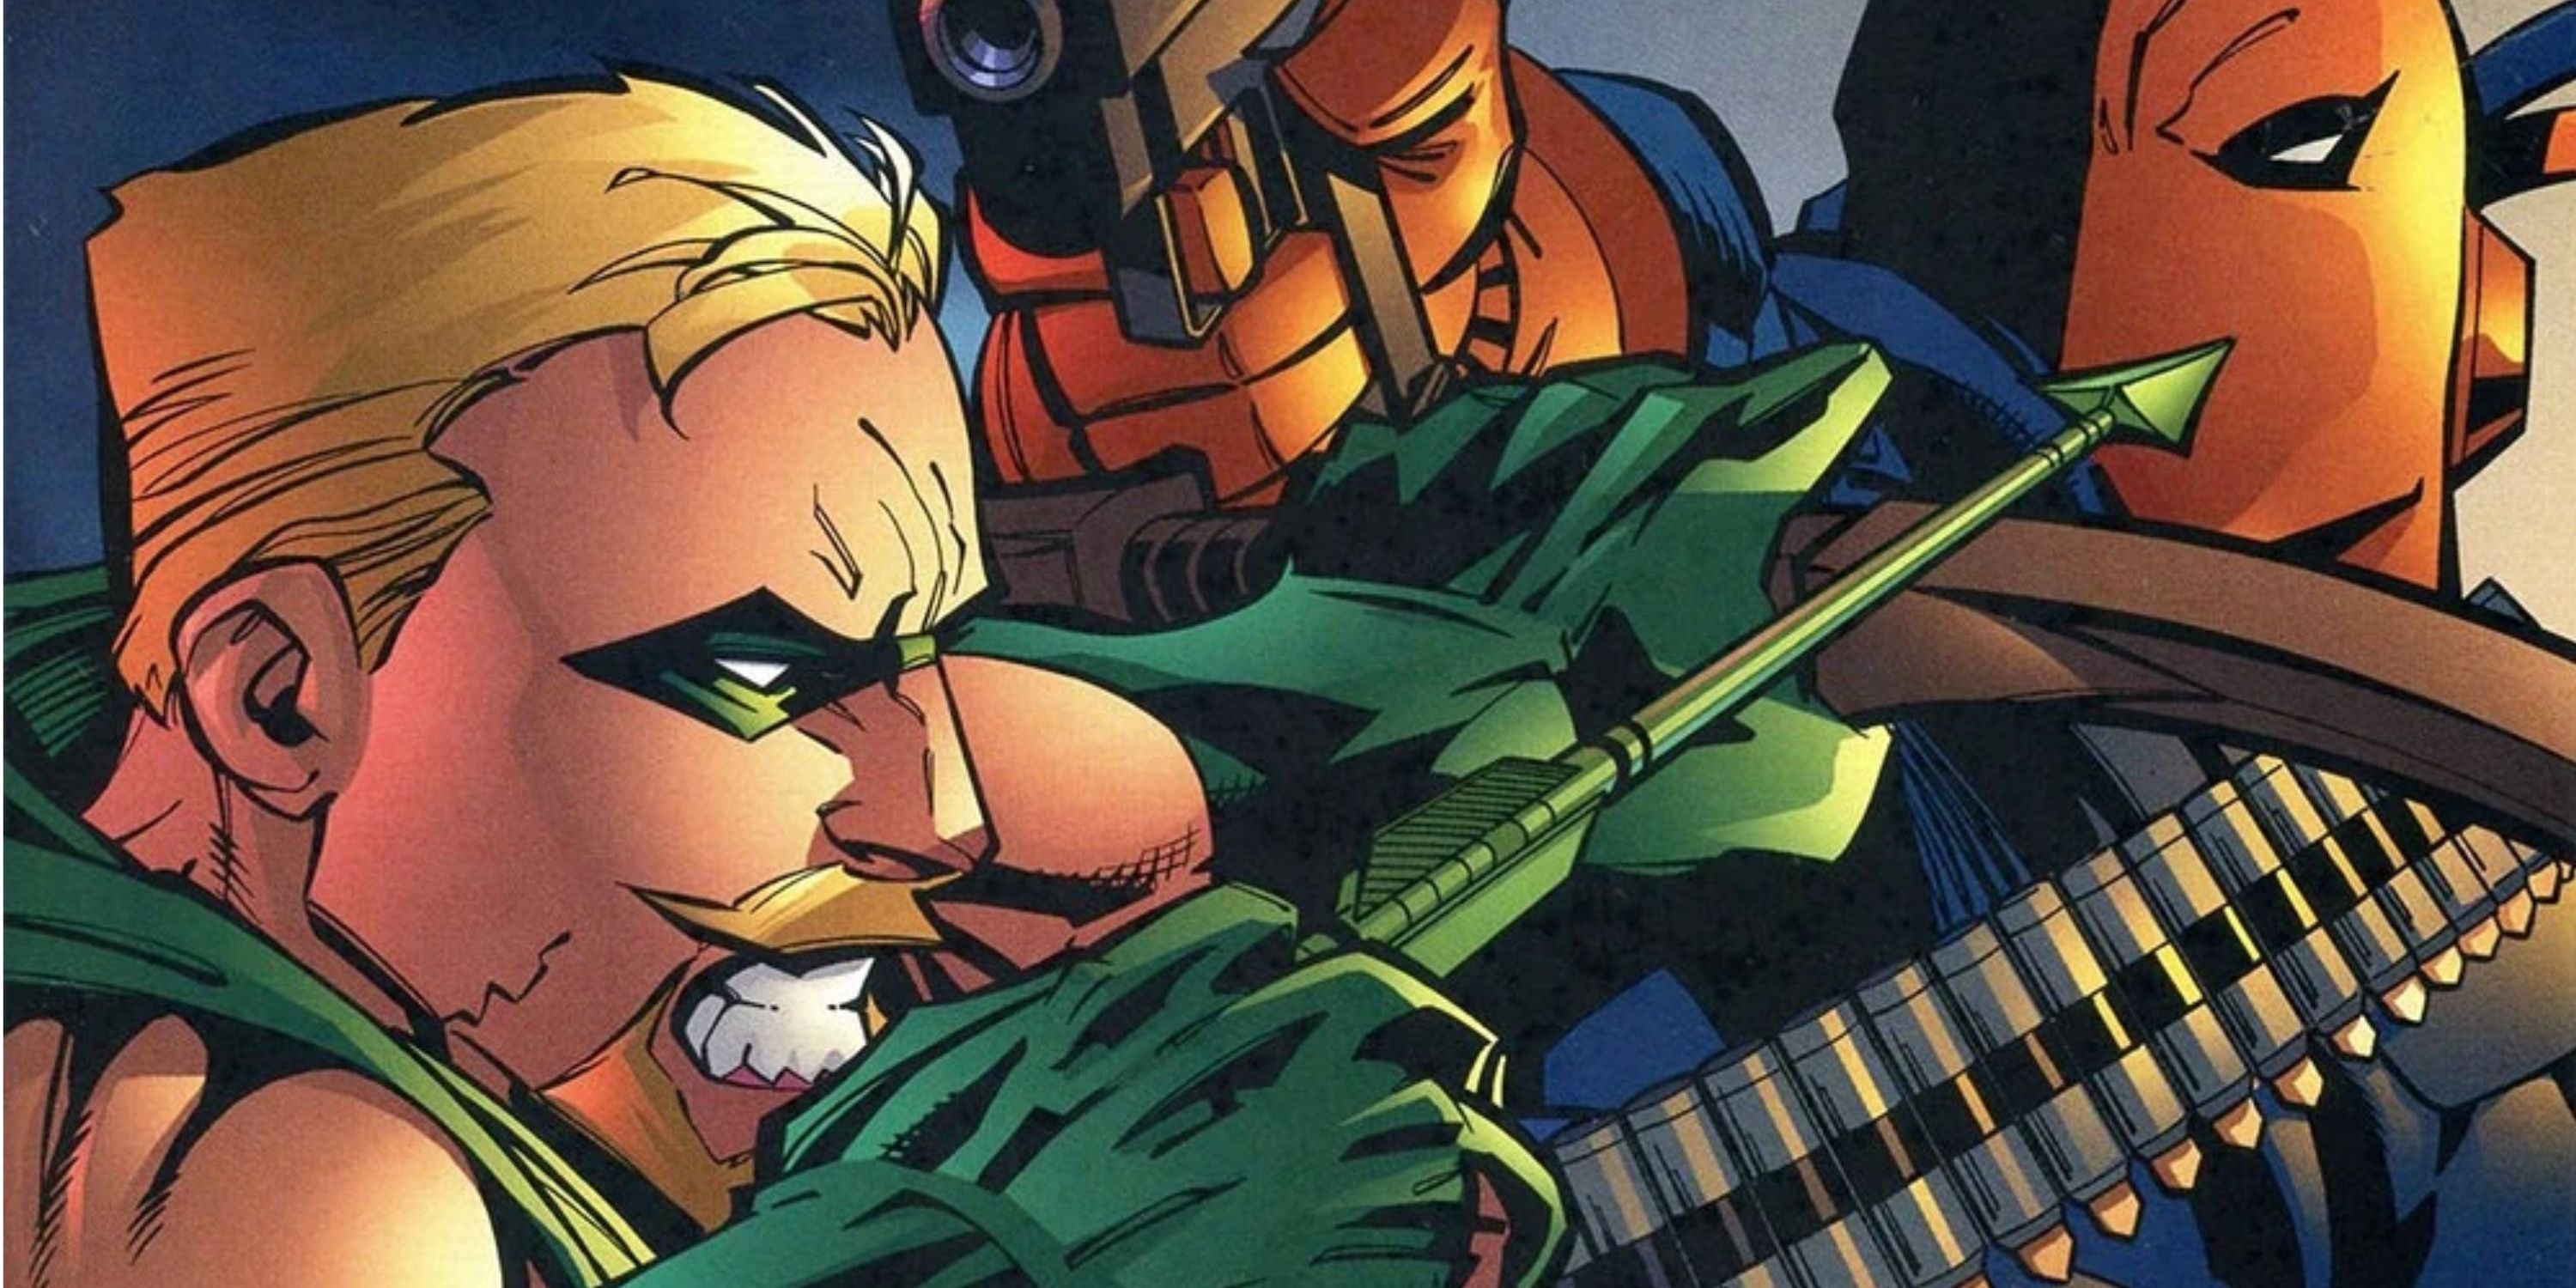 Green Arrow and Deathstroke in battle from DC Comics